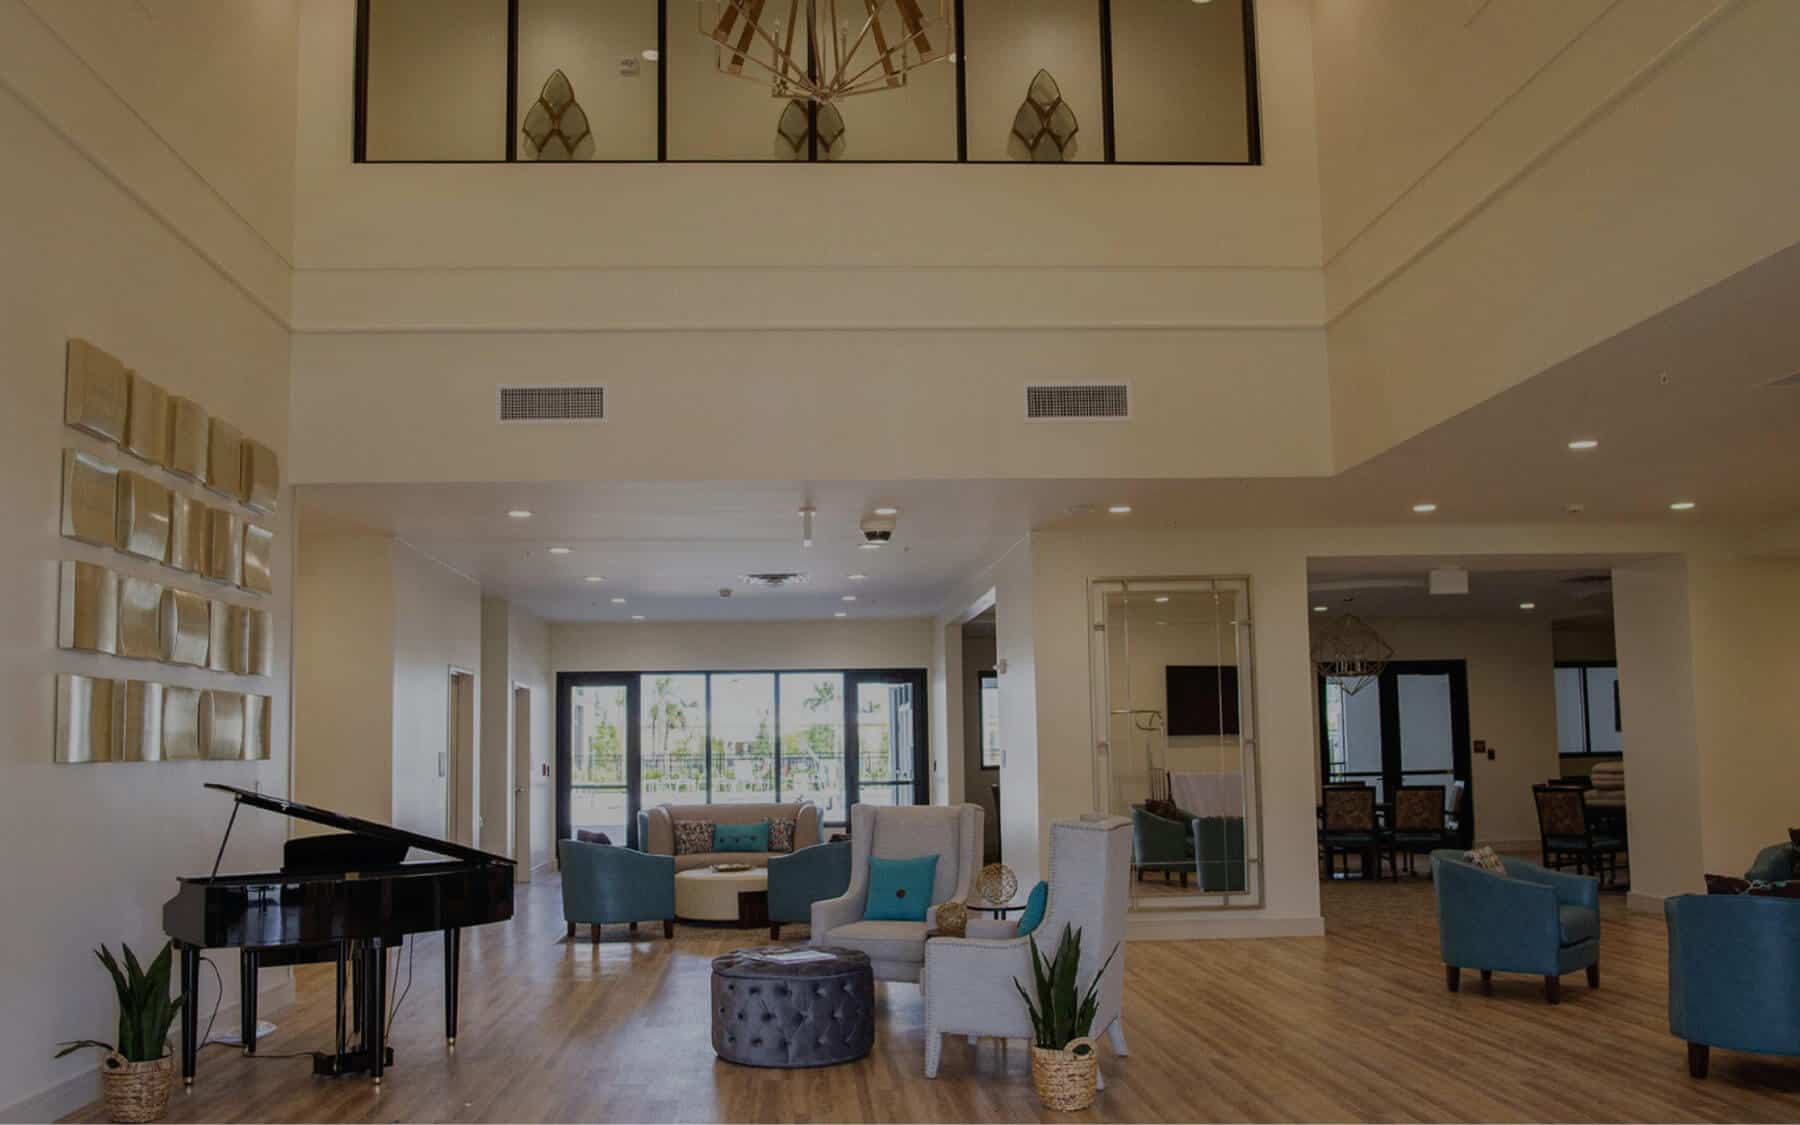 Lobby at Highpoint at Cape Coral includes piano, multiple seating areas and large windows.